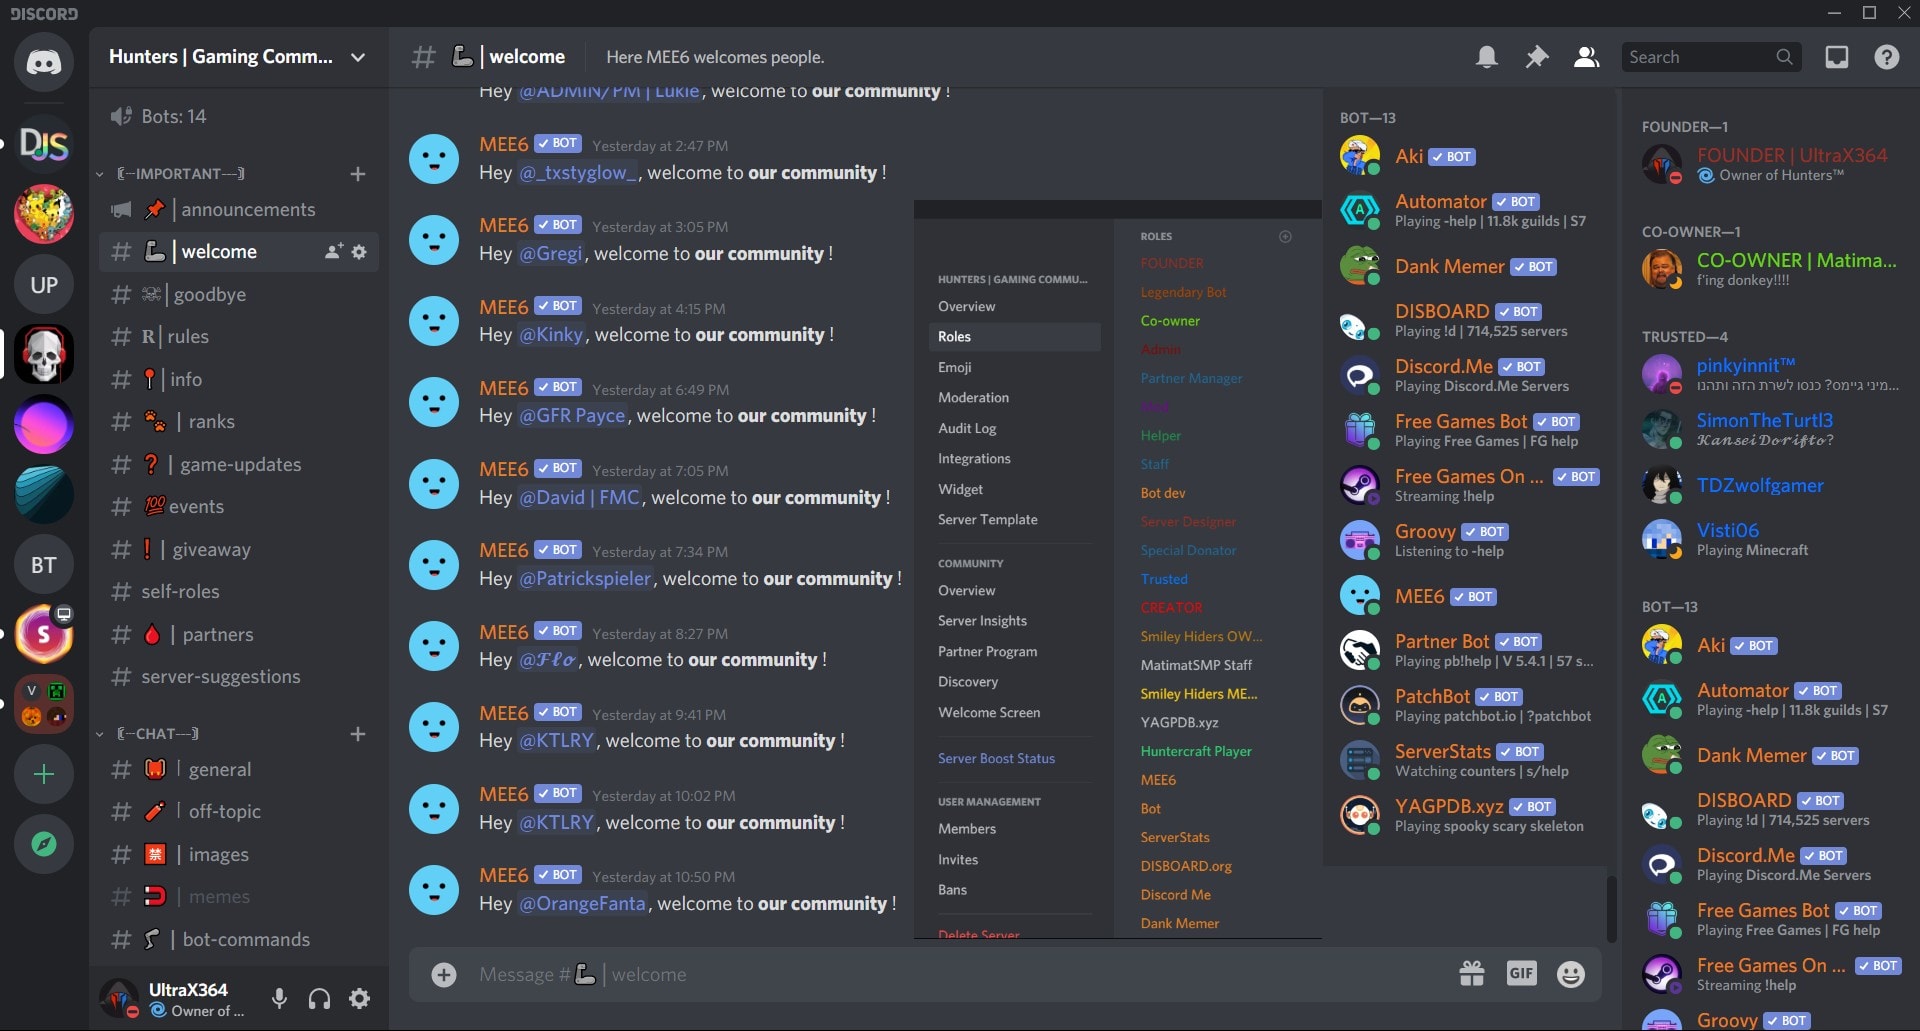 Importing Discord Server Templates – Guilded